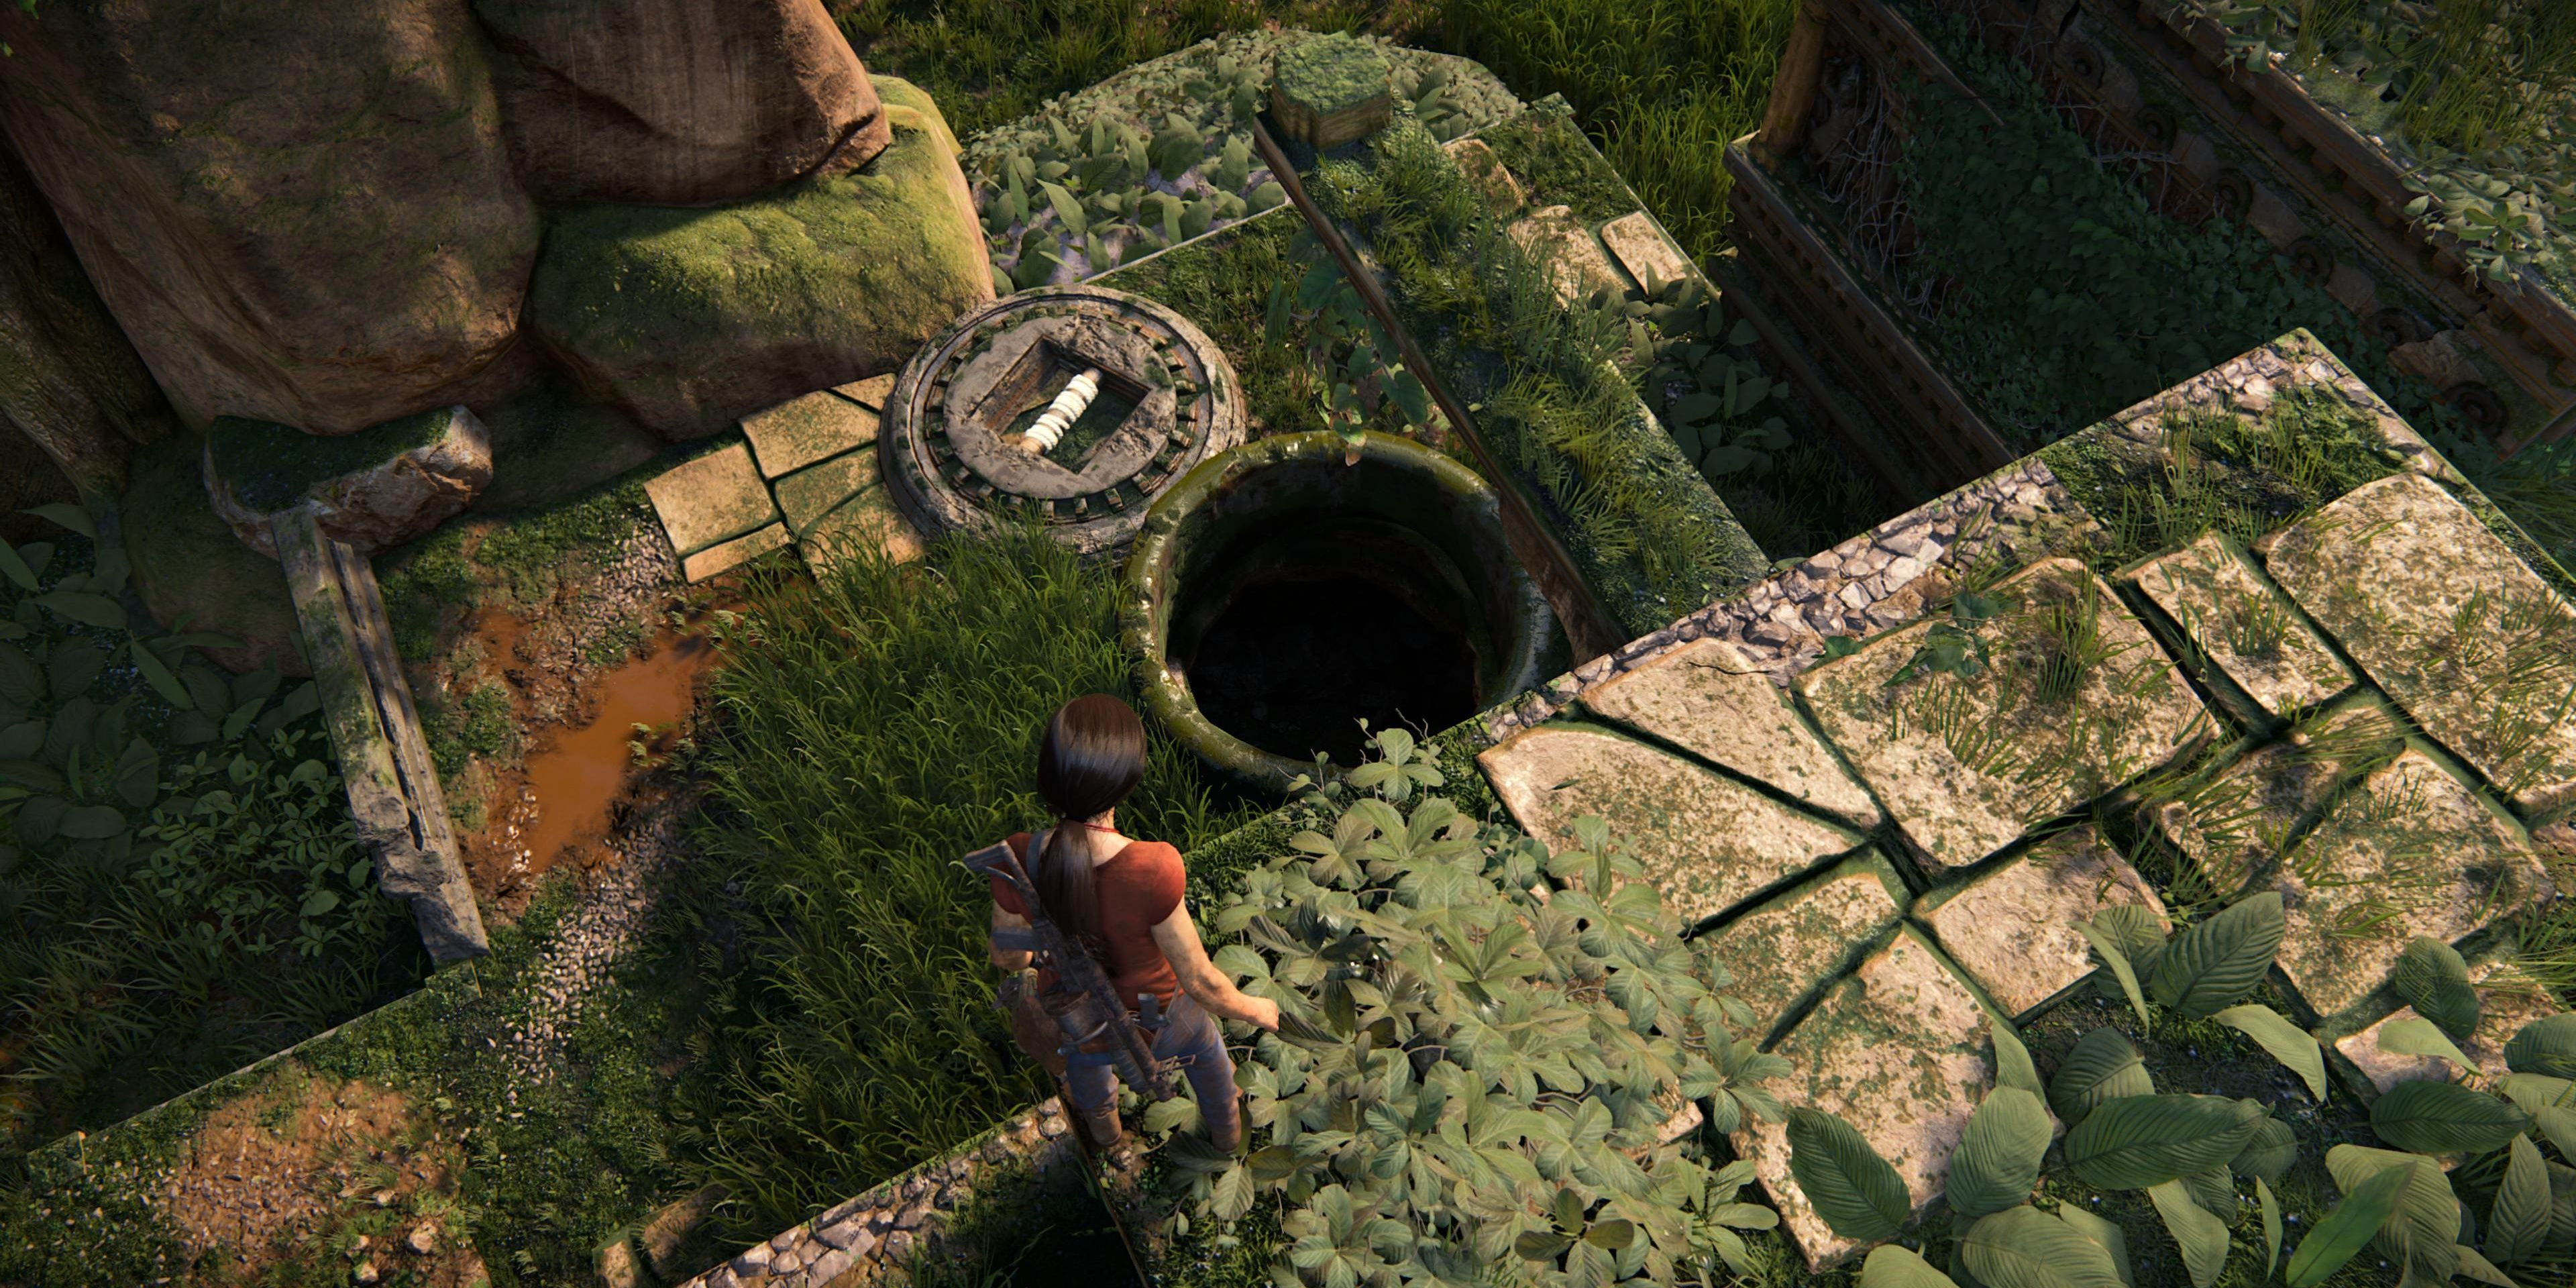 Elephant Token location in Uncharted: A Lost Legacy